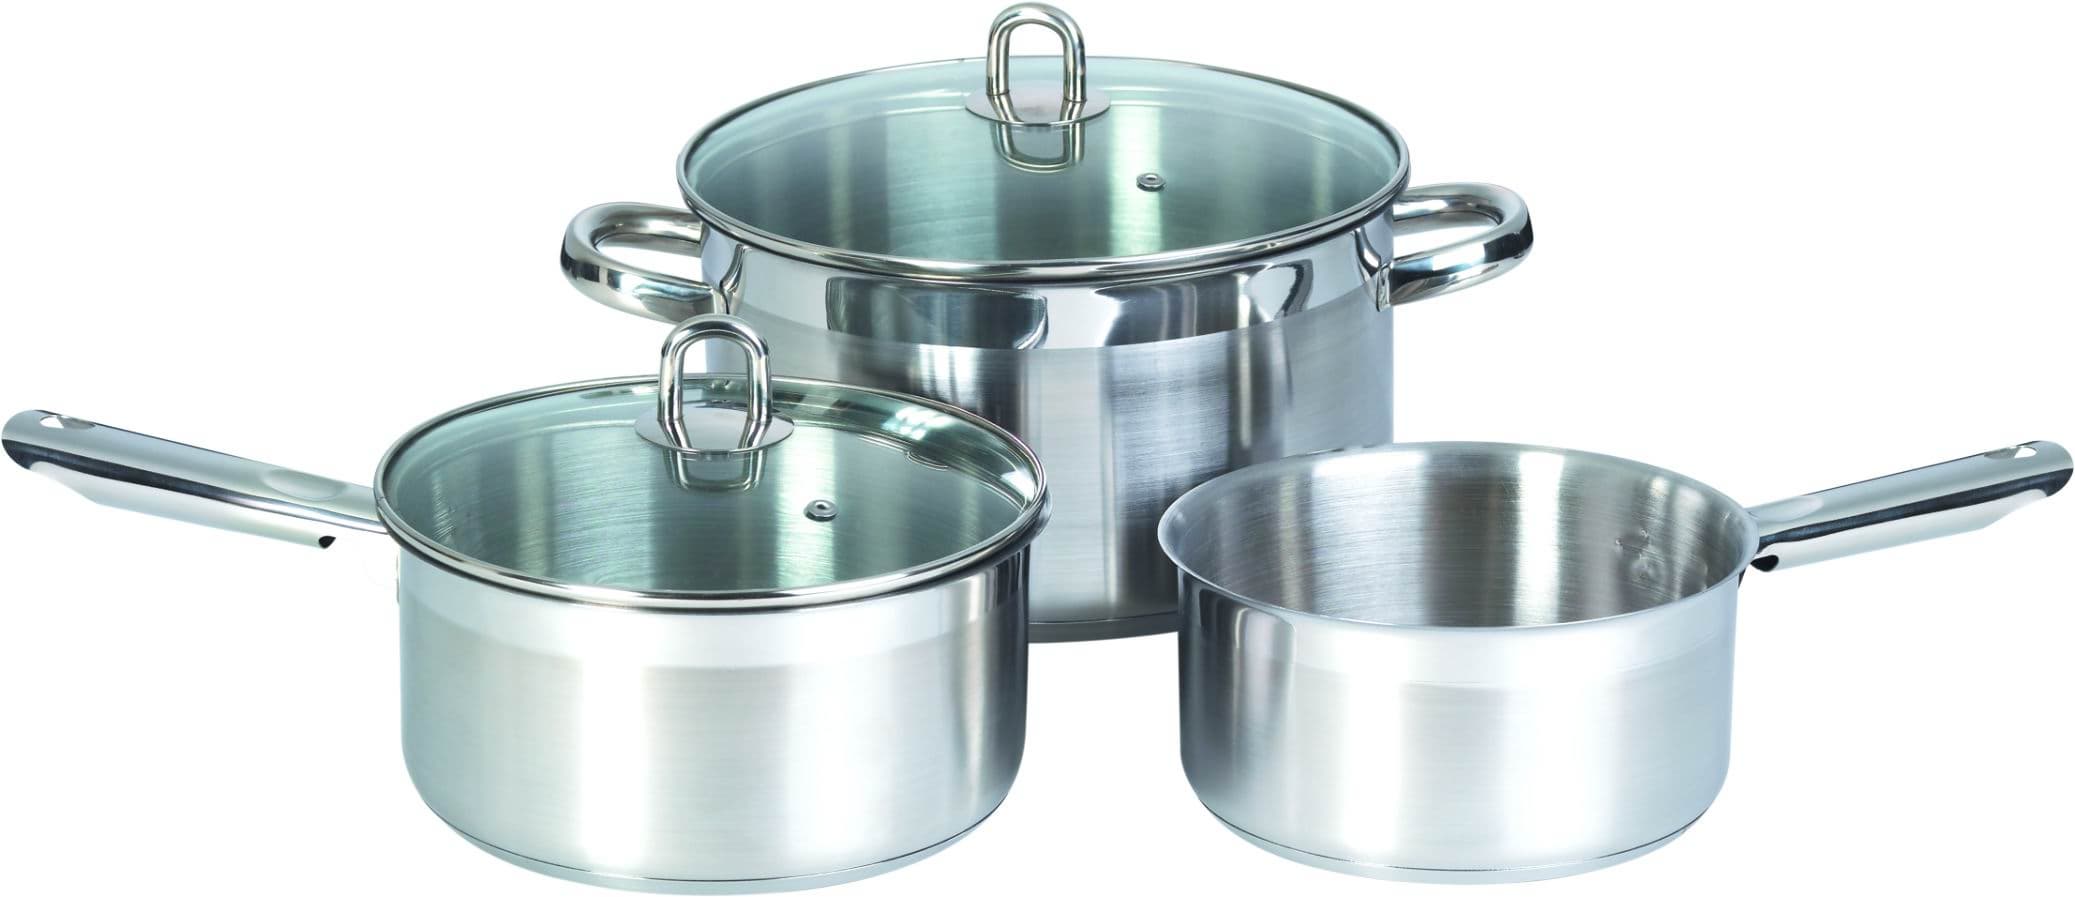 stainless steel Cookware Set